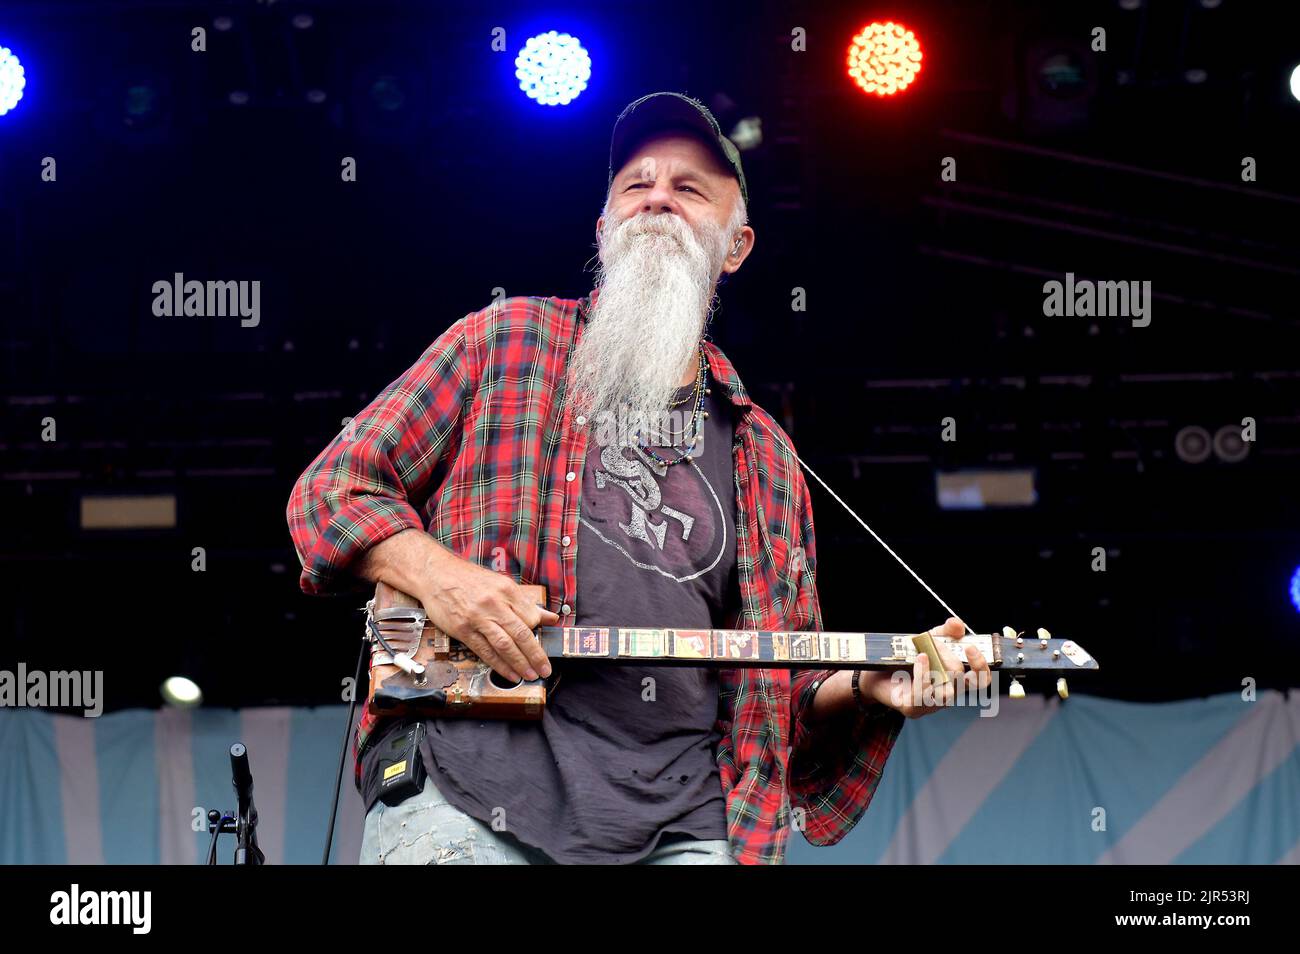 Seasick Steve, performing live at Hardwick live music festival Saturday 20th August 2022, England, UK Stock Photo